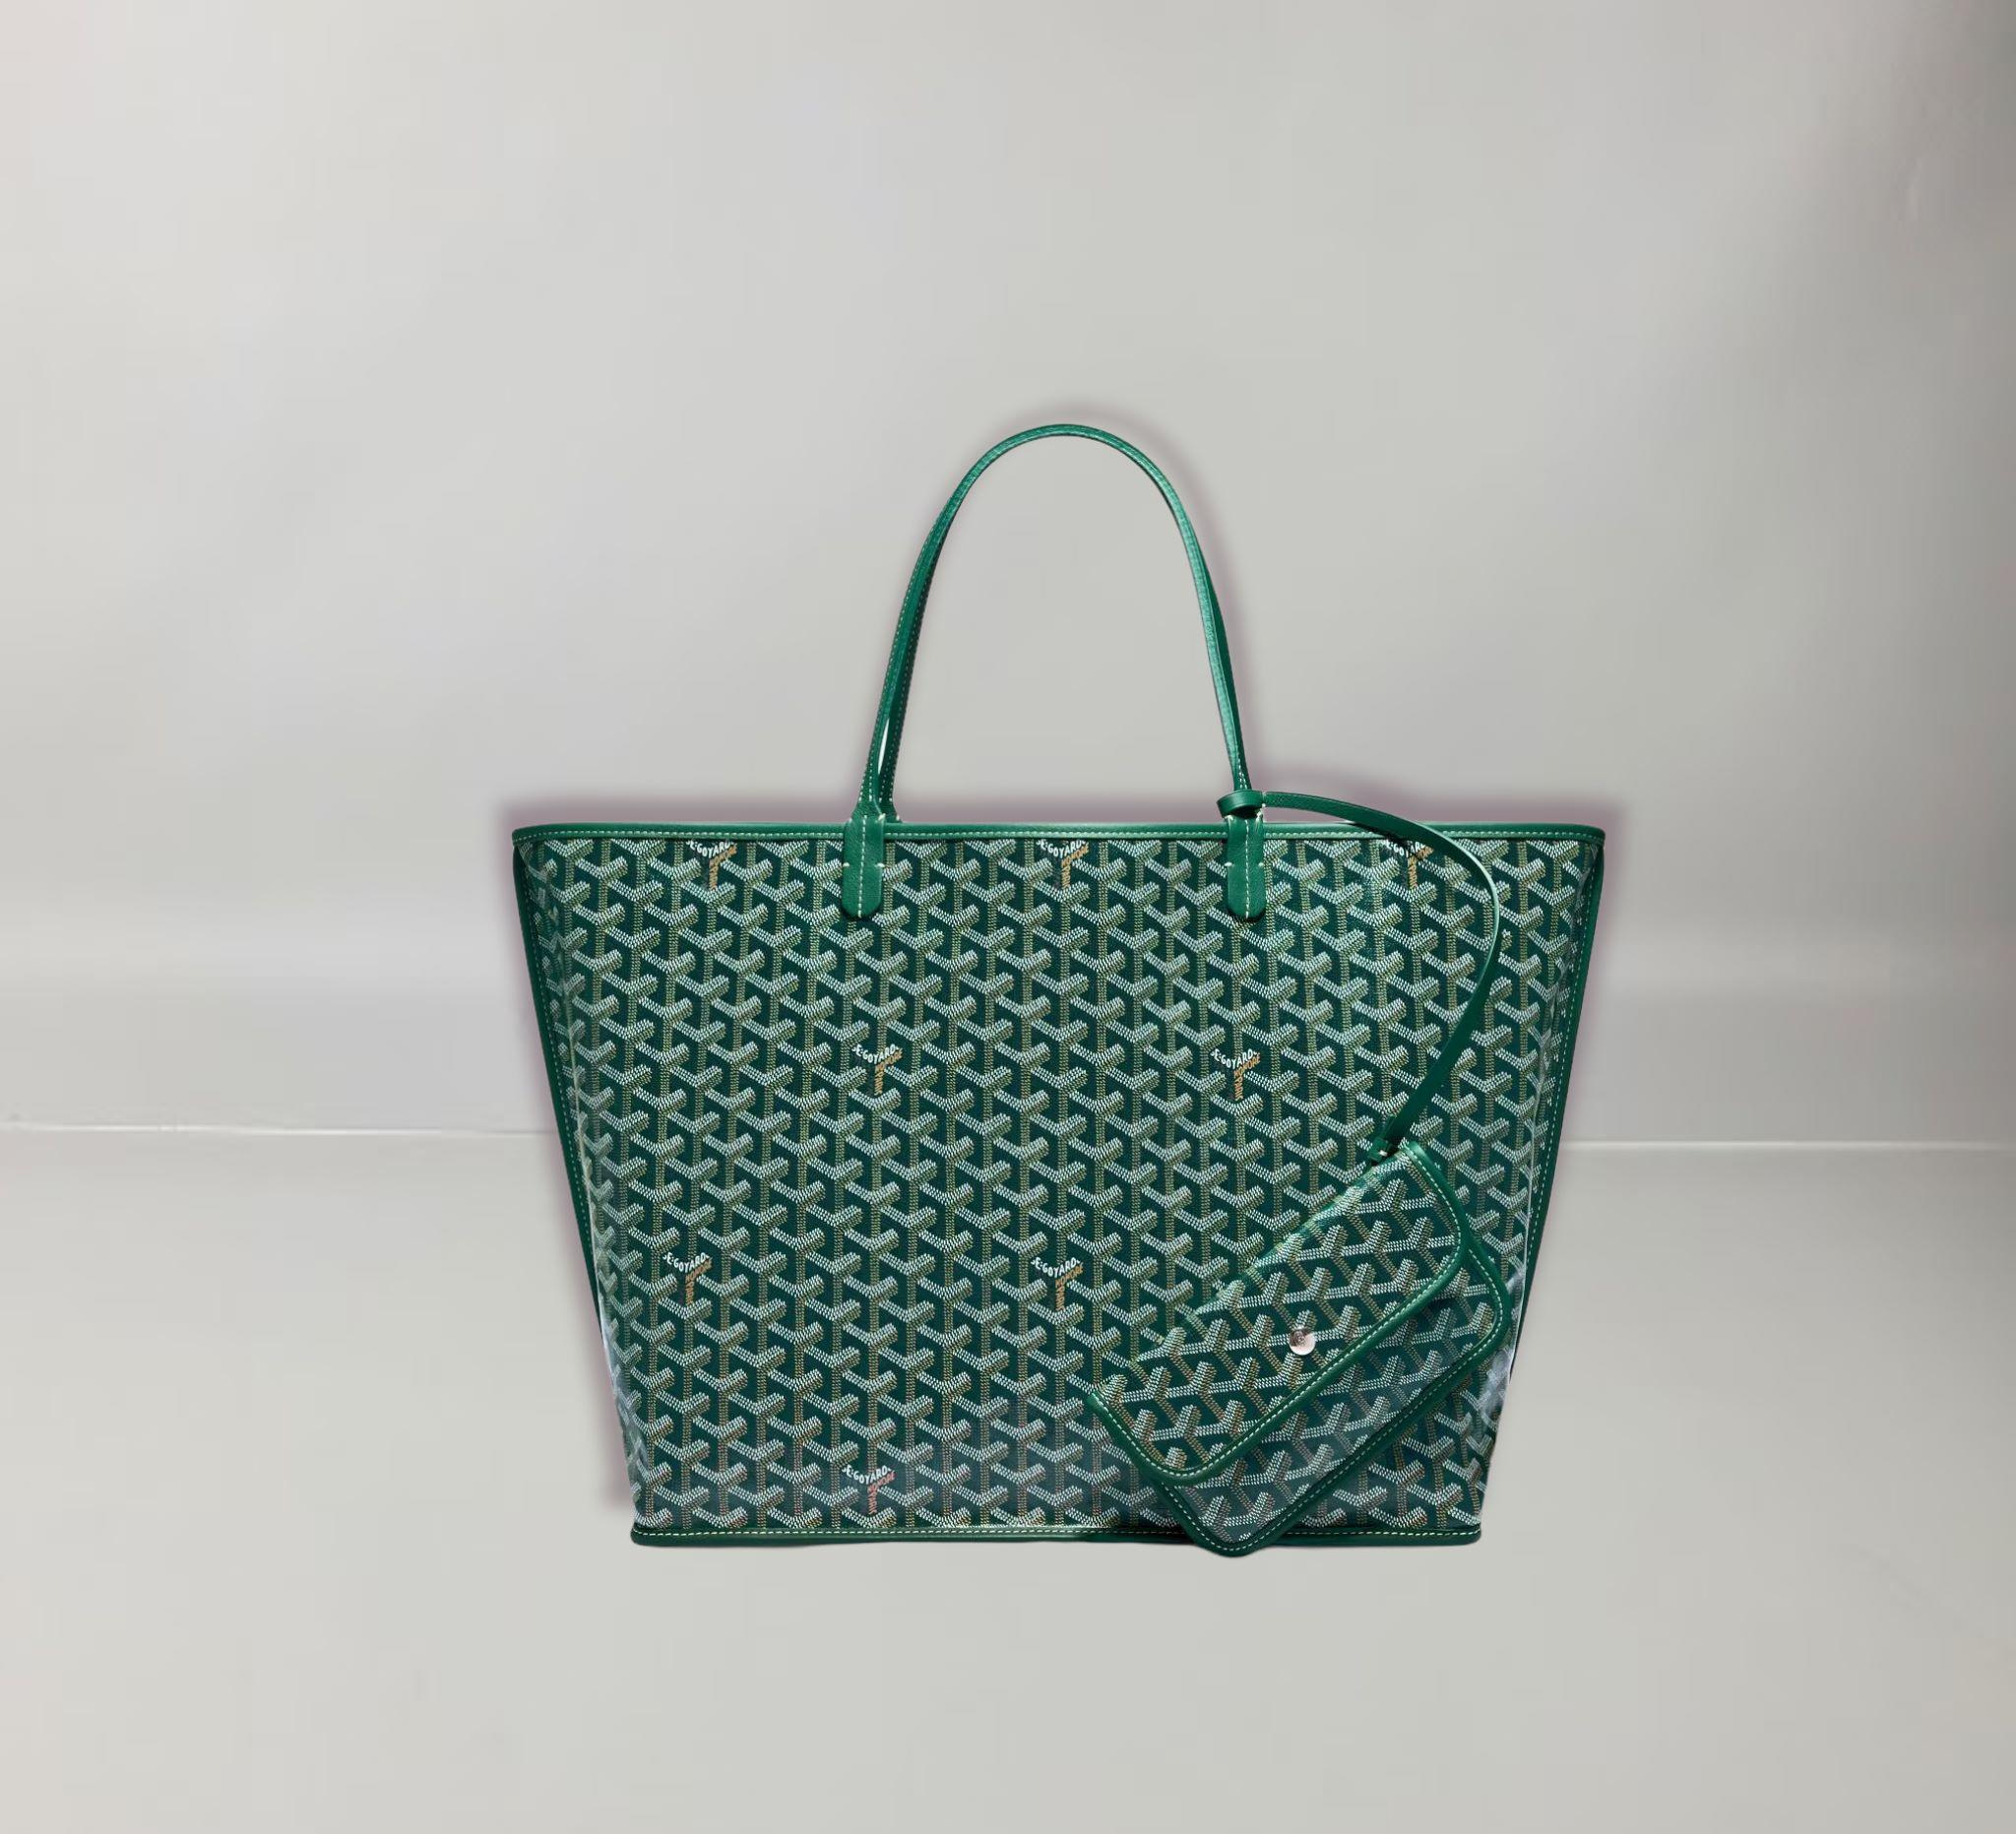 Goyard's Bag dont have cardboard box, it will  be ship with dust bag and authenticity card
The Anjou GM bag is a nod to our emblematic Saint Louis bag but in a leather version lined with Goyardine. Reversible, it has two different styles and looks.